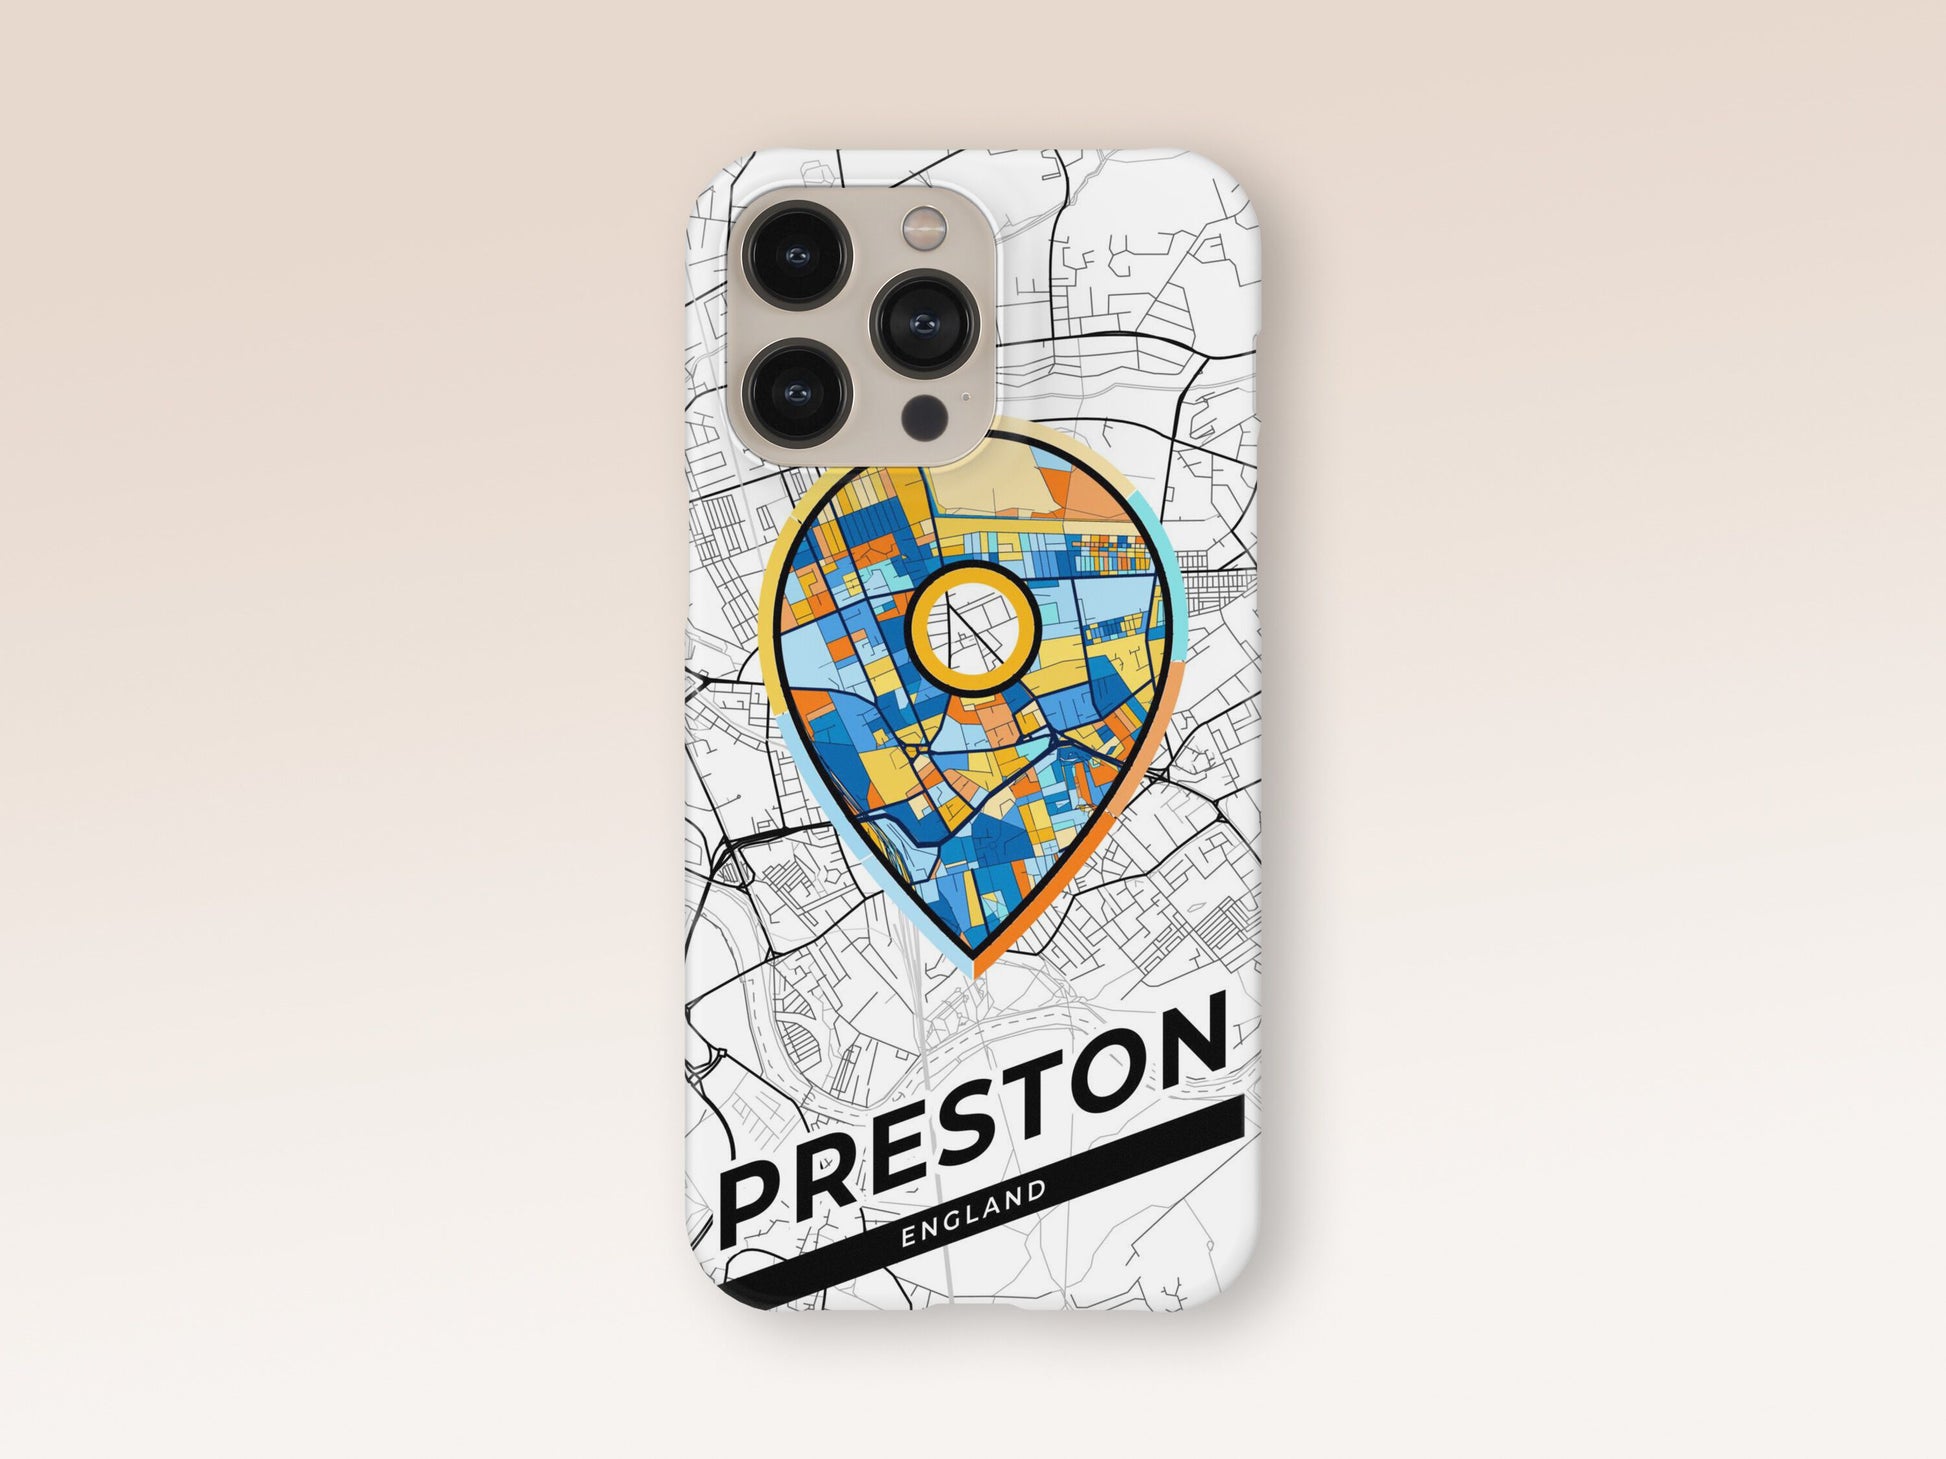 Preston England slim phone case with colorful icon. Birthday, wedding or housewarming gift. Couple match cases. 1